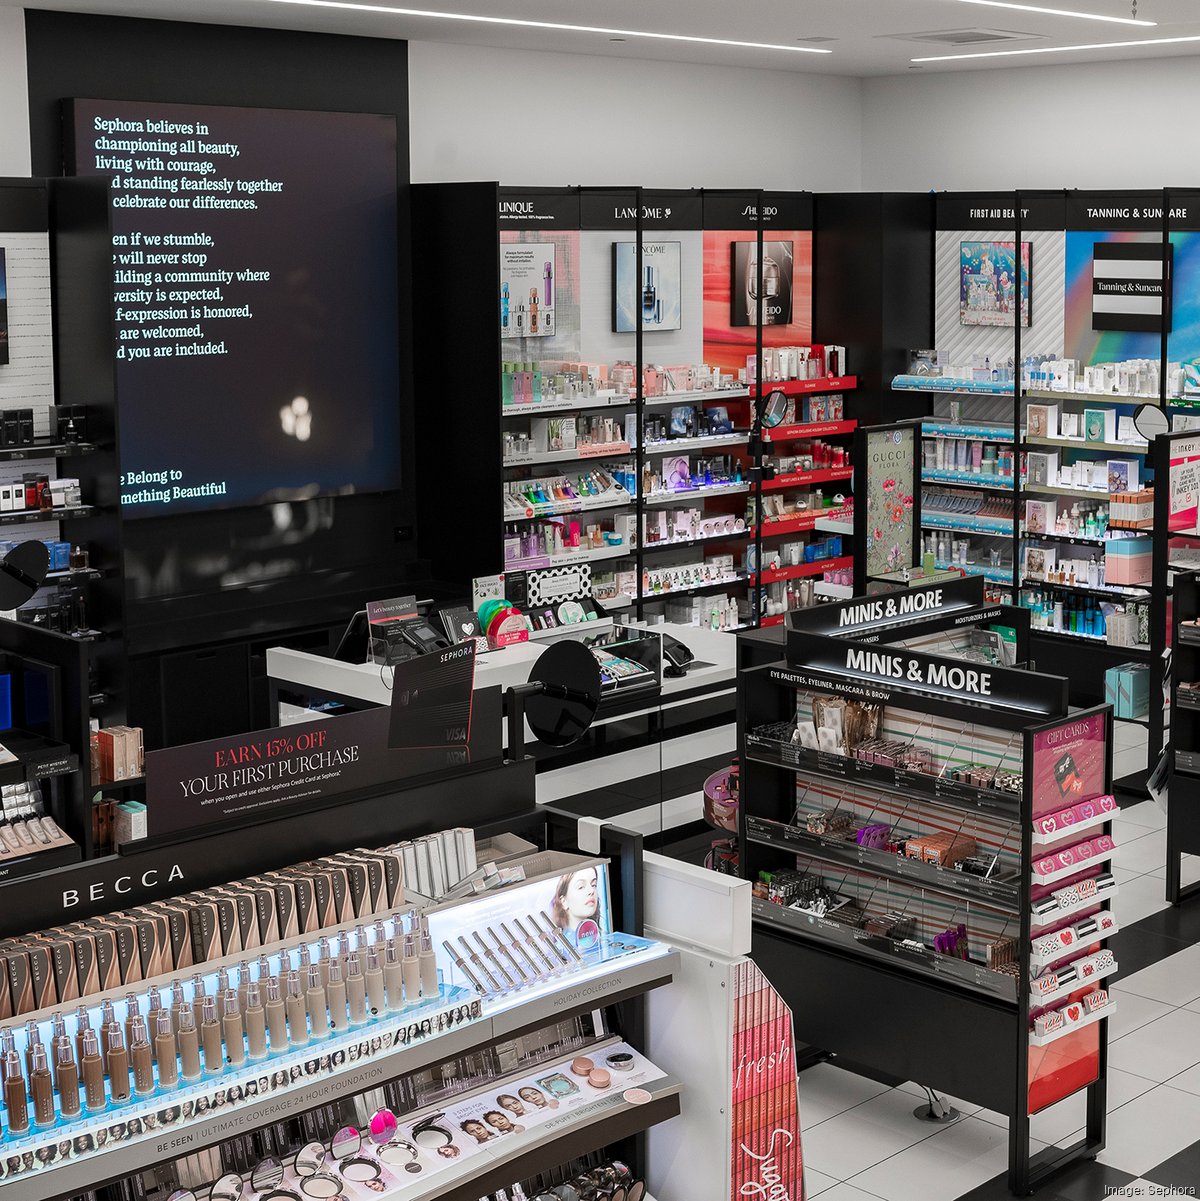 Sephora Set To Welcome Customers To New Brick Store